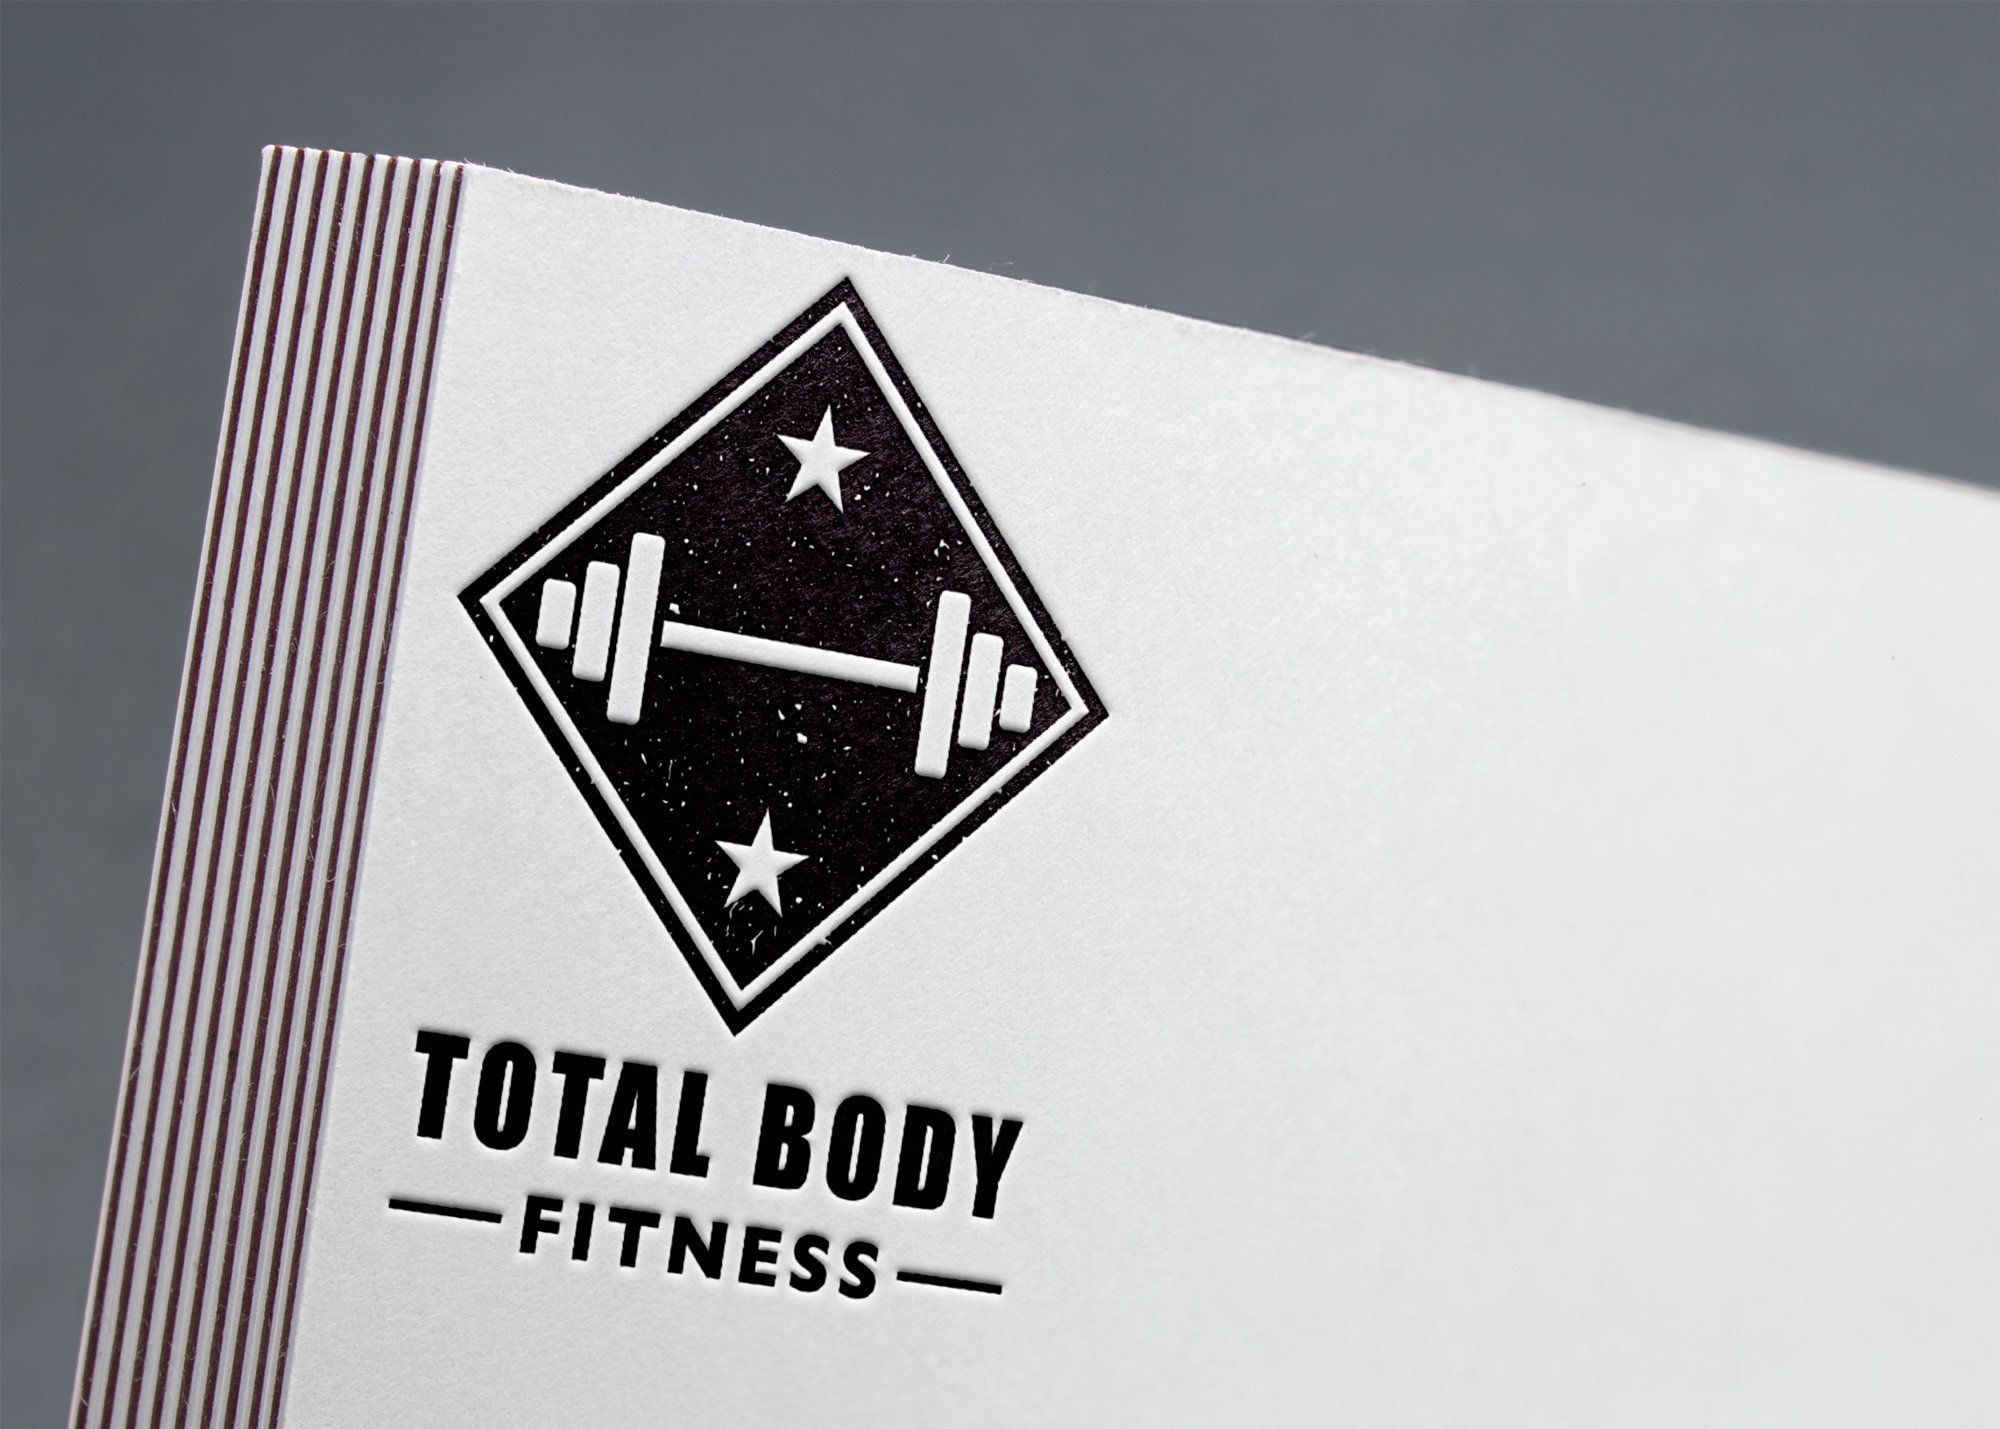 Fitness Fit Logo Design  Personal Trainer Logo  Body | Etsy - Fitness Fit Logo Design  Personal Trainer Logo  Body | Etsy -   19 moda fitness Logo ideas